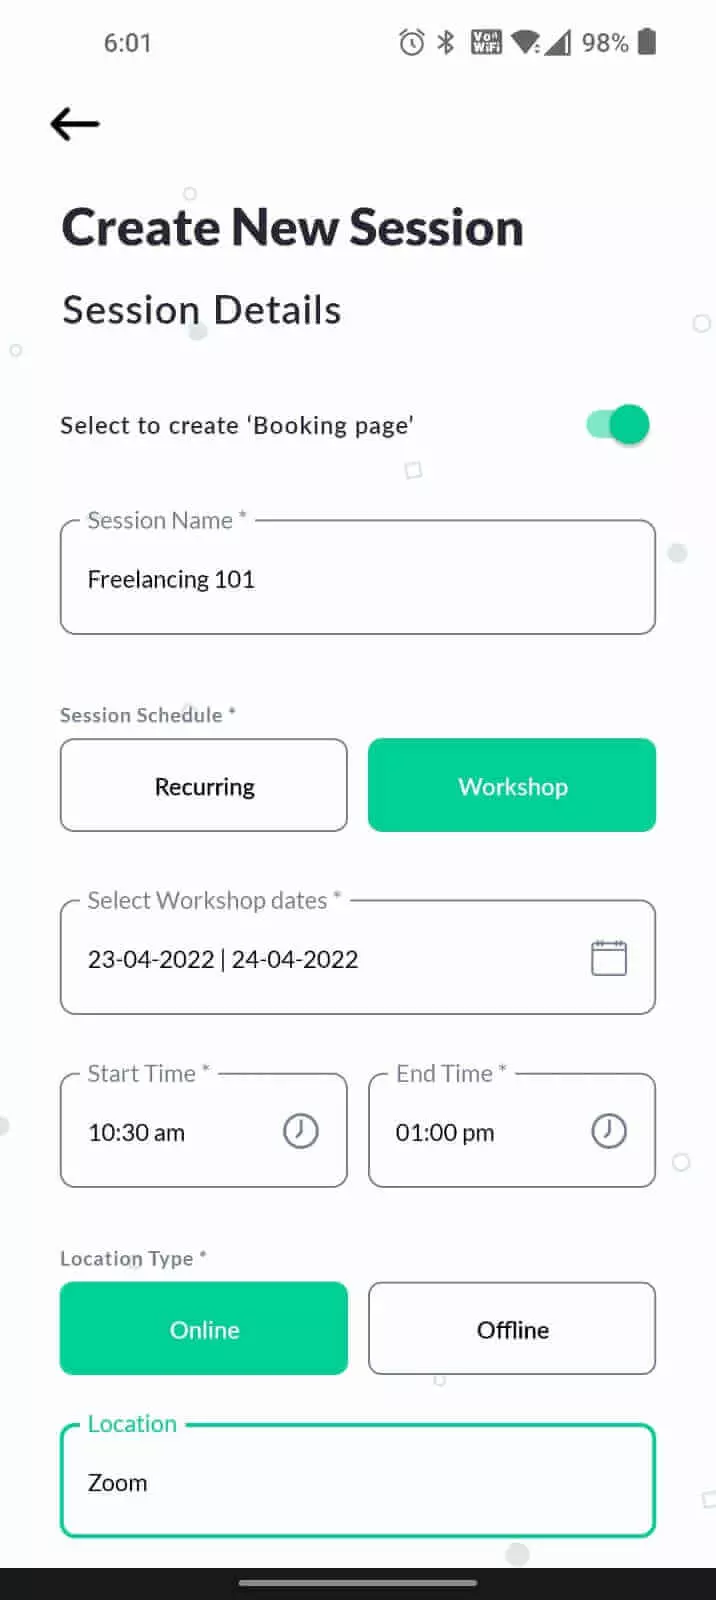 Toggle on ‘Create booking page’ & Fill in workshop details